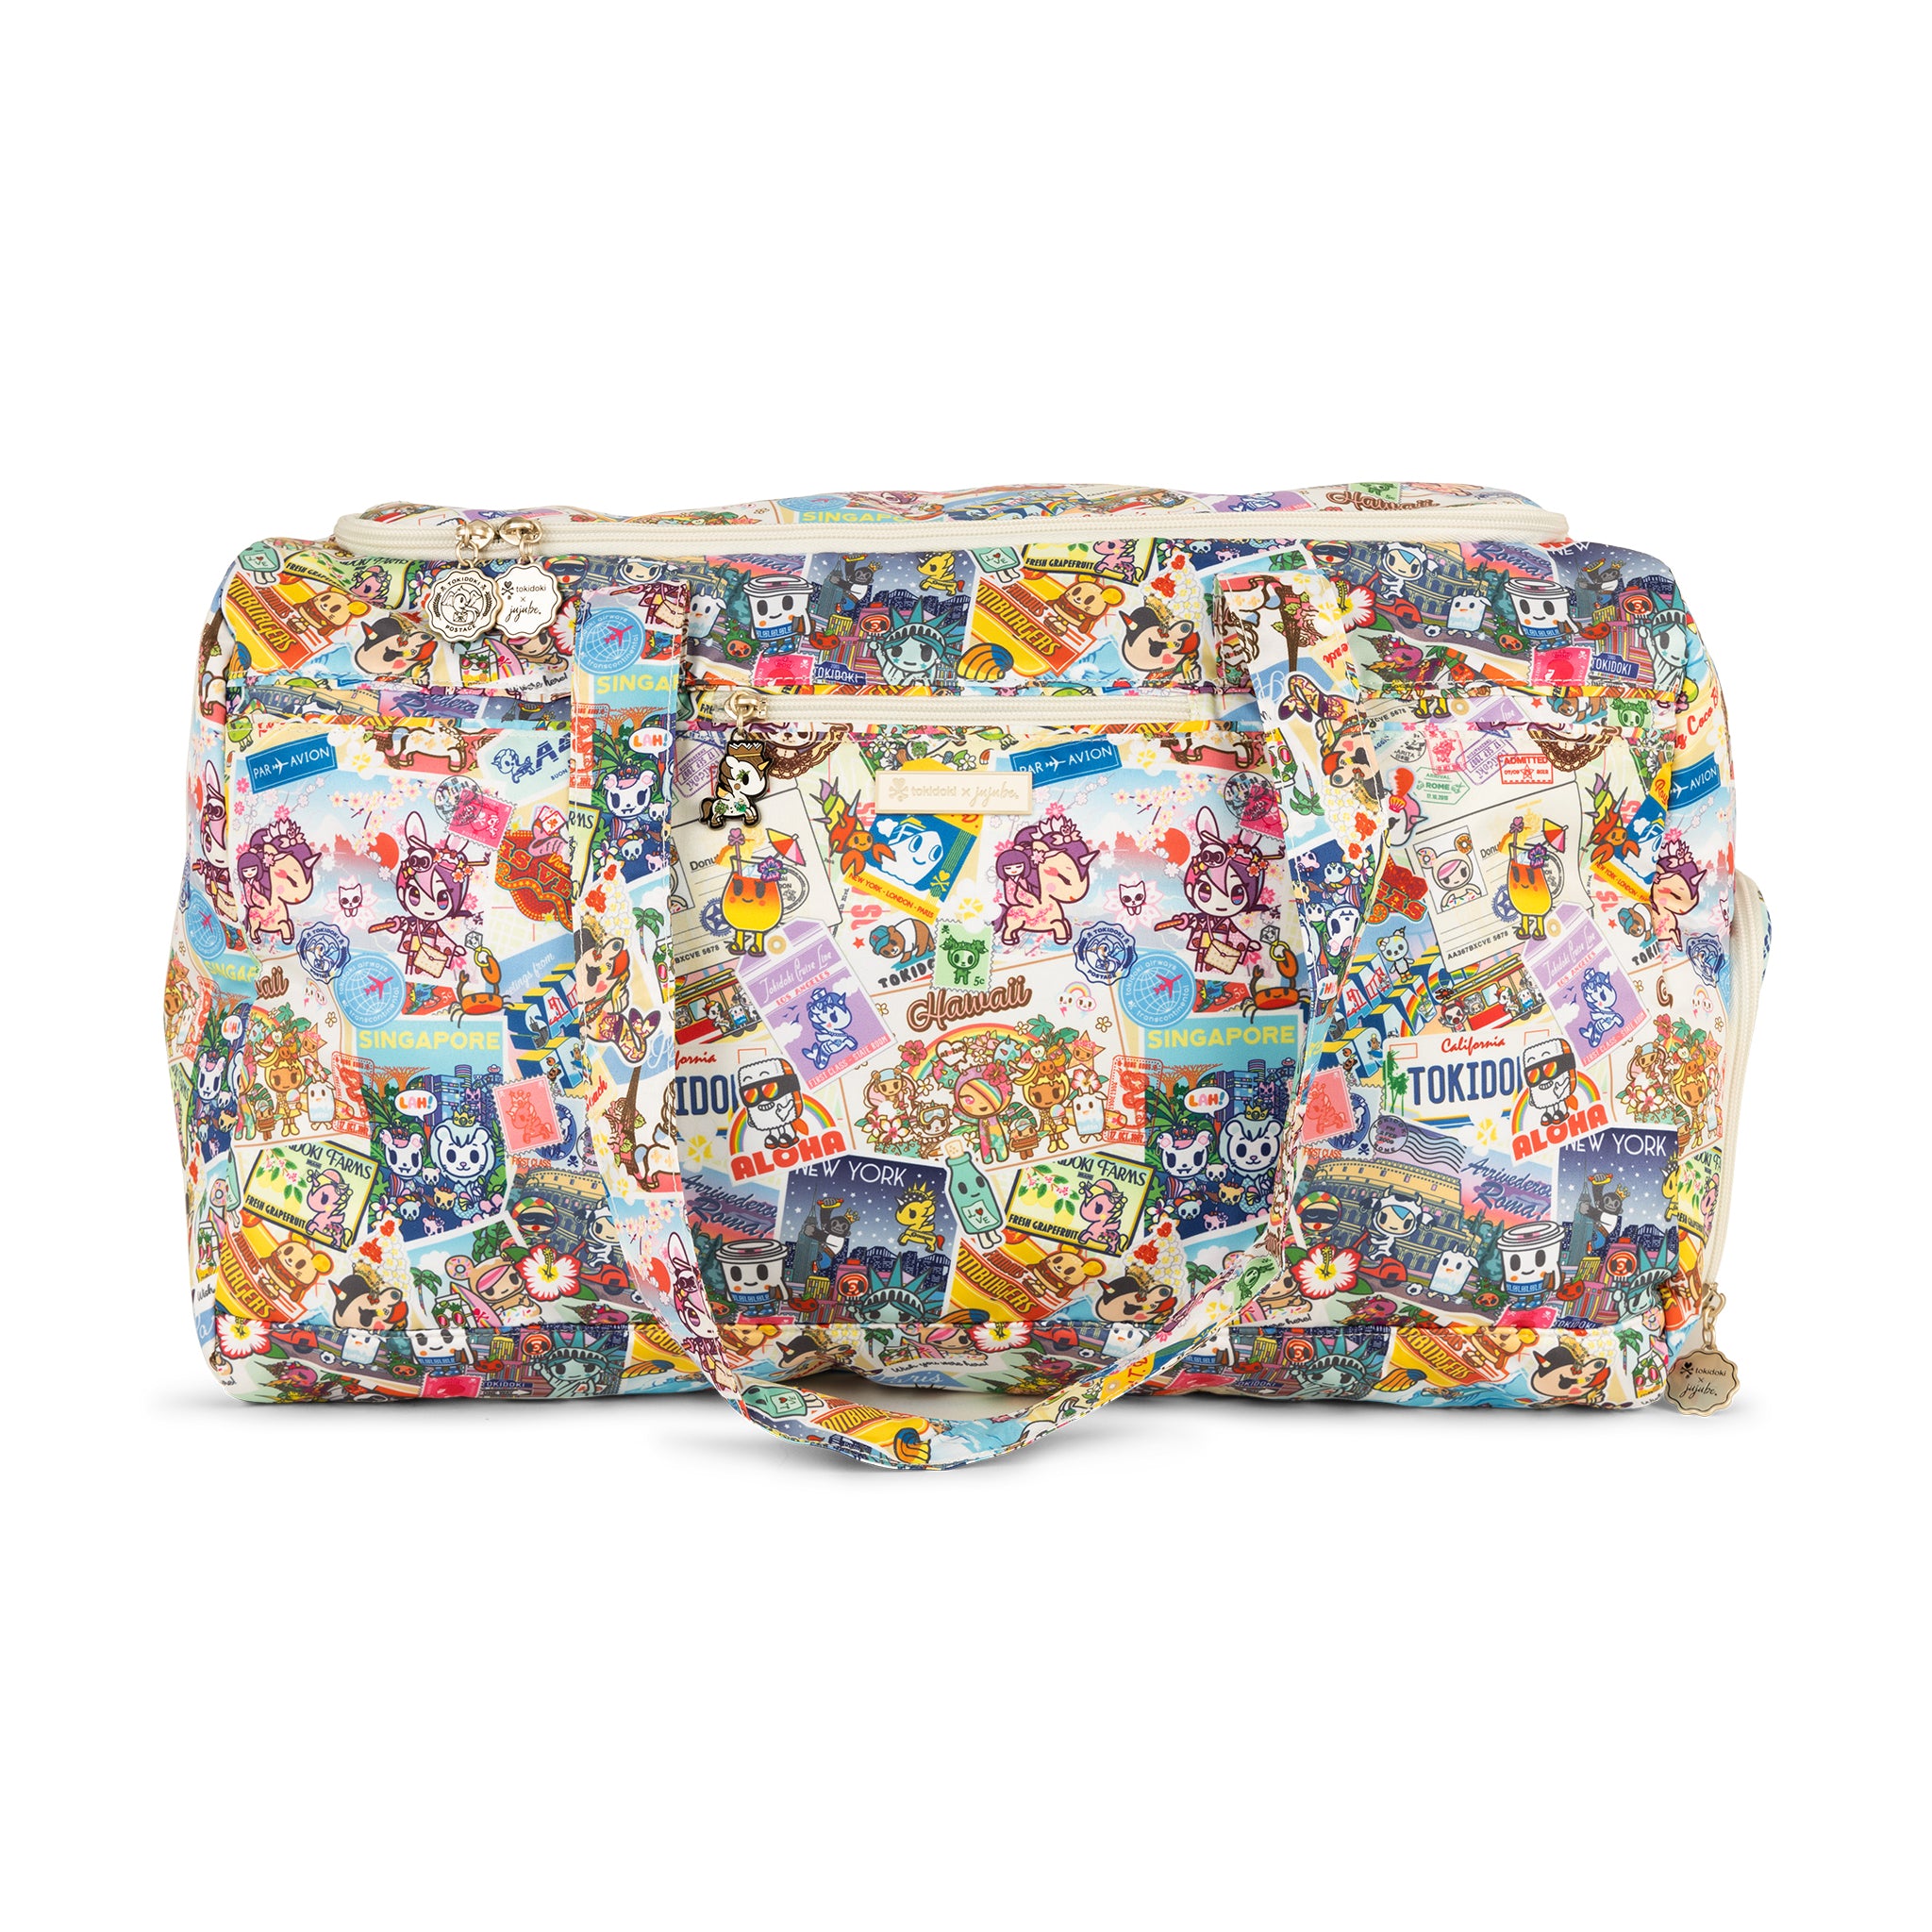 Multicolor Postcards with tokidoki characters traveling Super Star Duffle Bag Front View